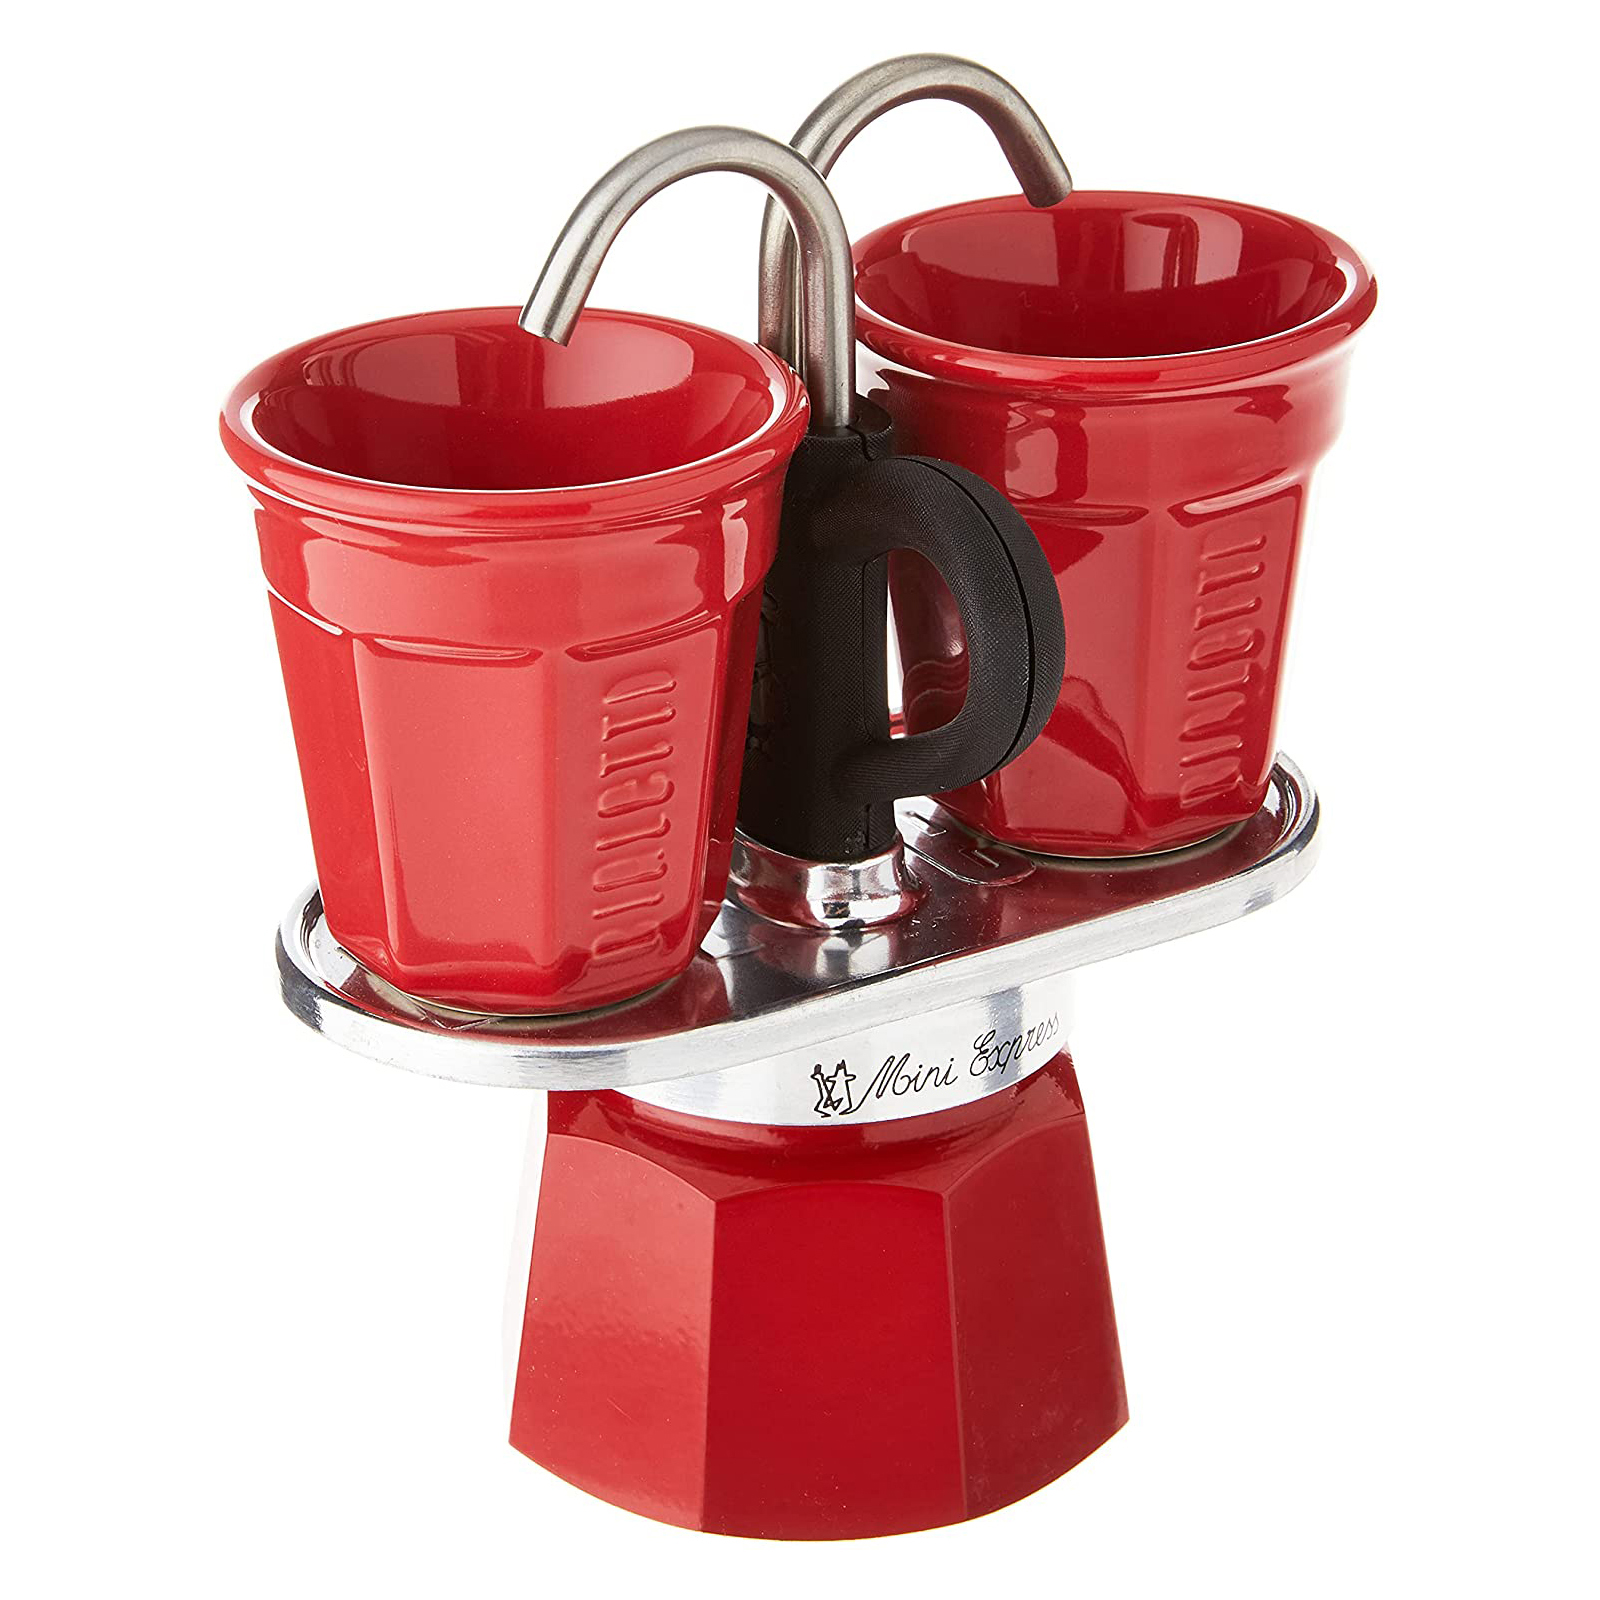 https://cdn11.bigcommerce.com/s-2plzc/product_images/uploaded_images/bialetti-mini-express-red-cups-2-3.jpg